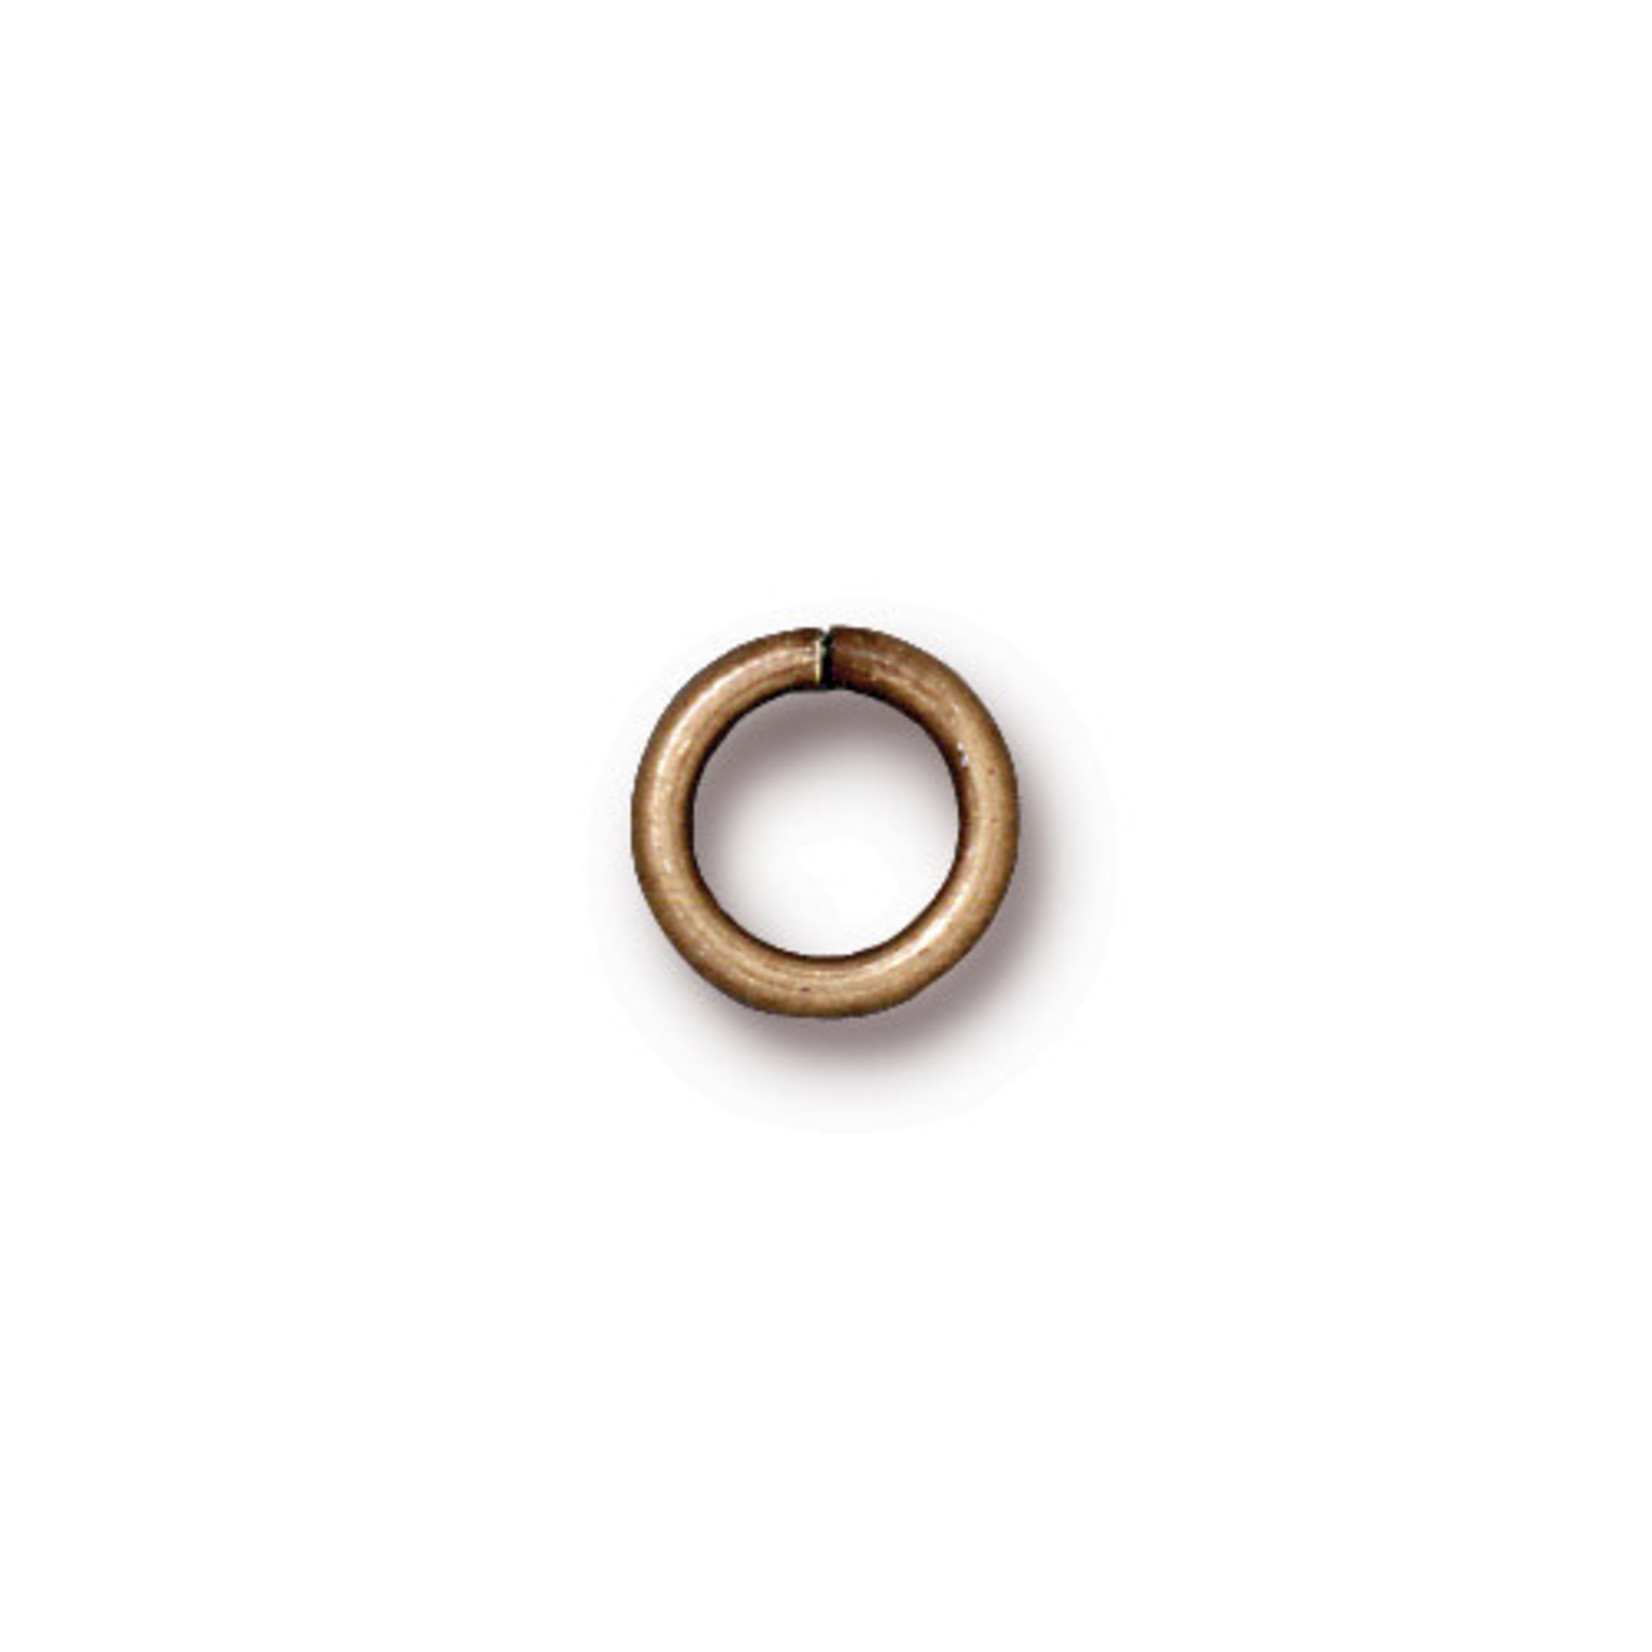 TierraCast Oxidized Brass Plated Round Jump Ring 16 Ga, 5mm ID - 10 pieces